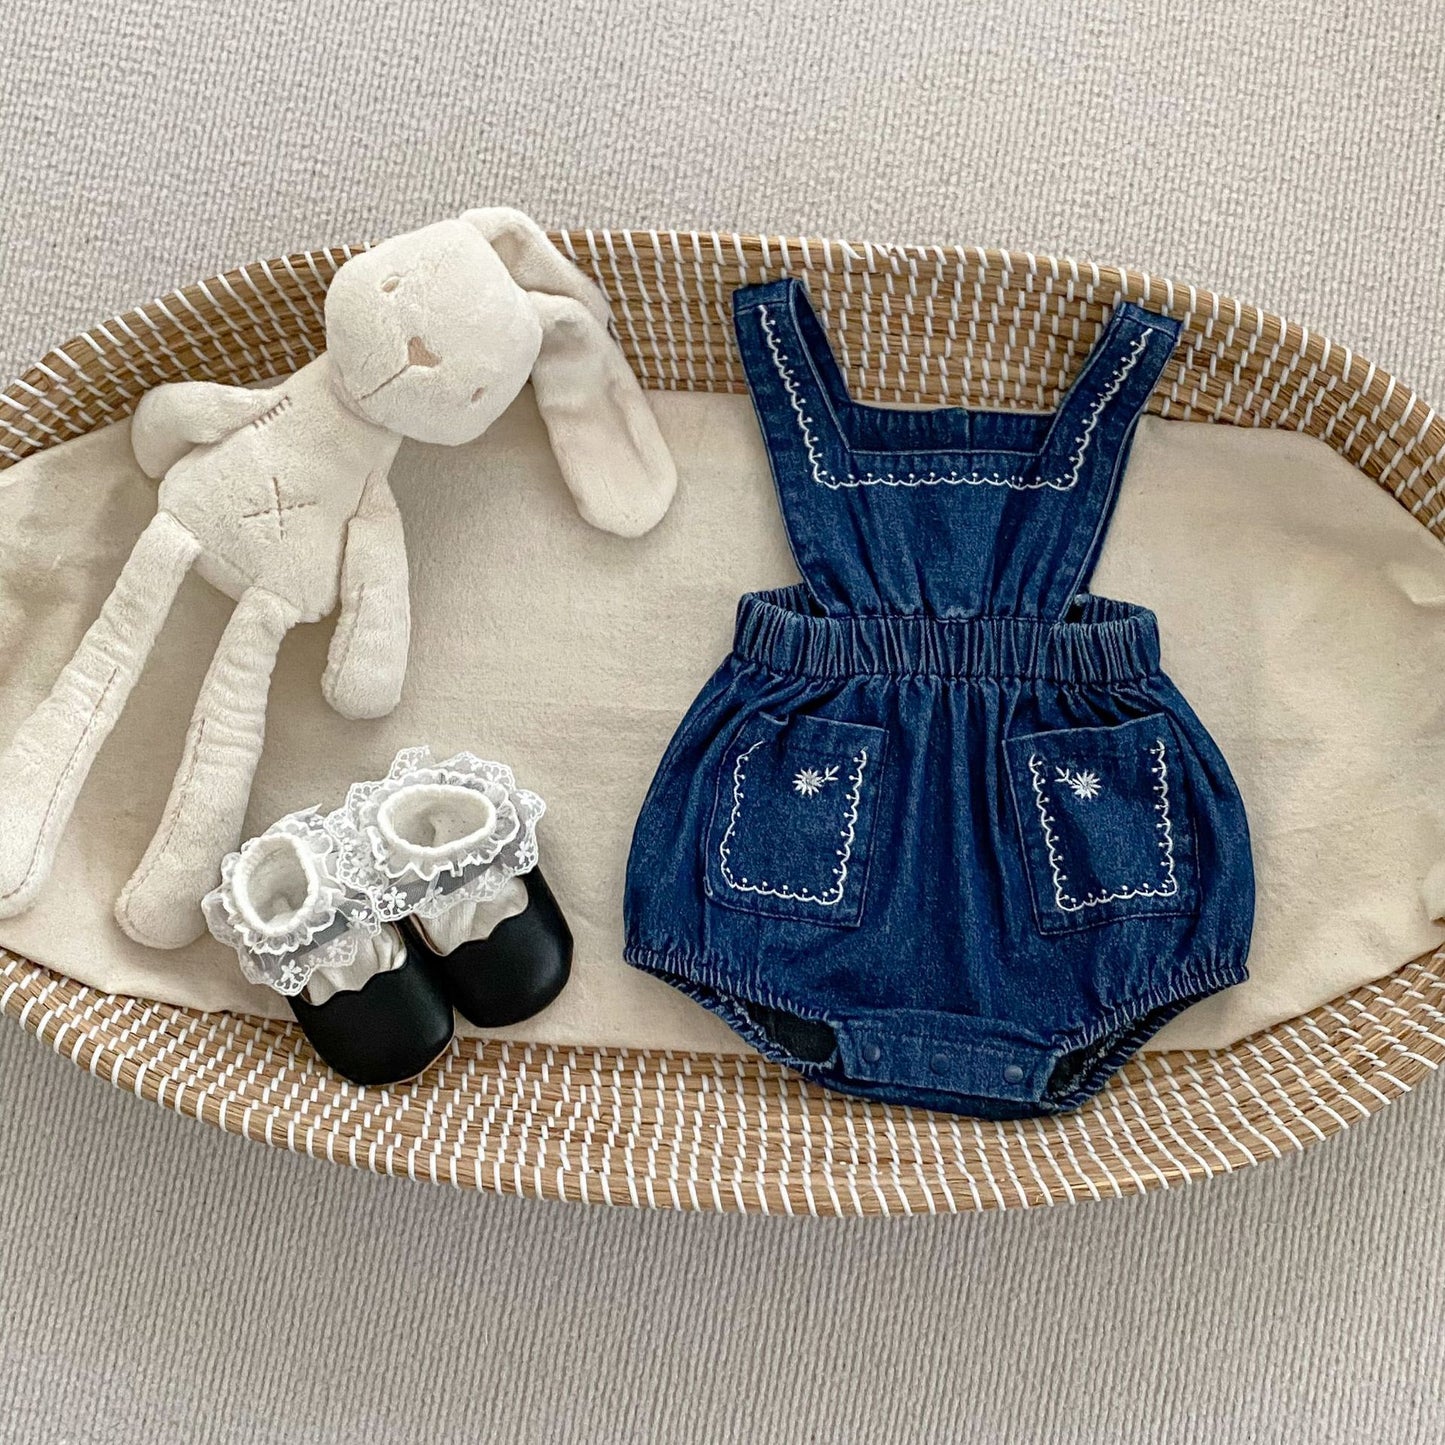 Spring Baby And Kids Girls Vintage White Shirt And Denim Overalls/Onesie Clothing Set